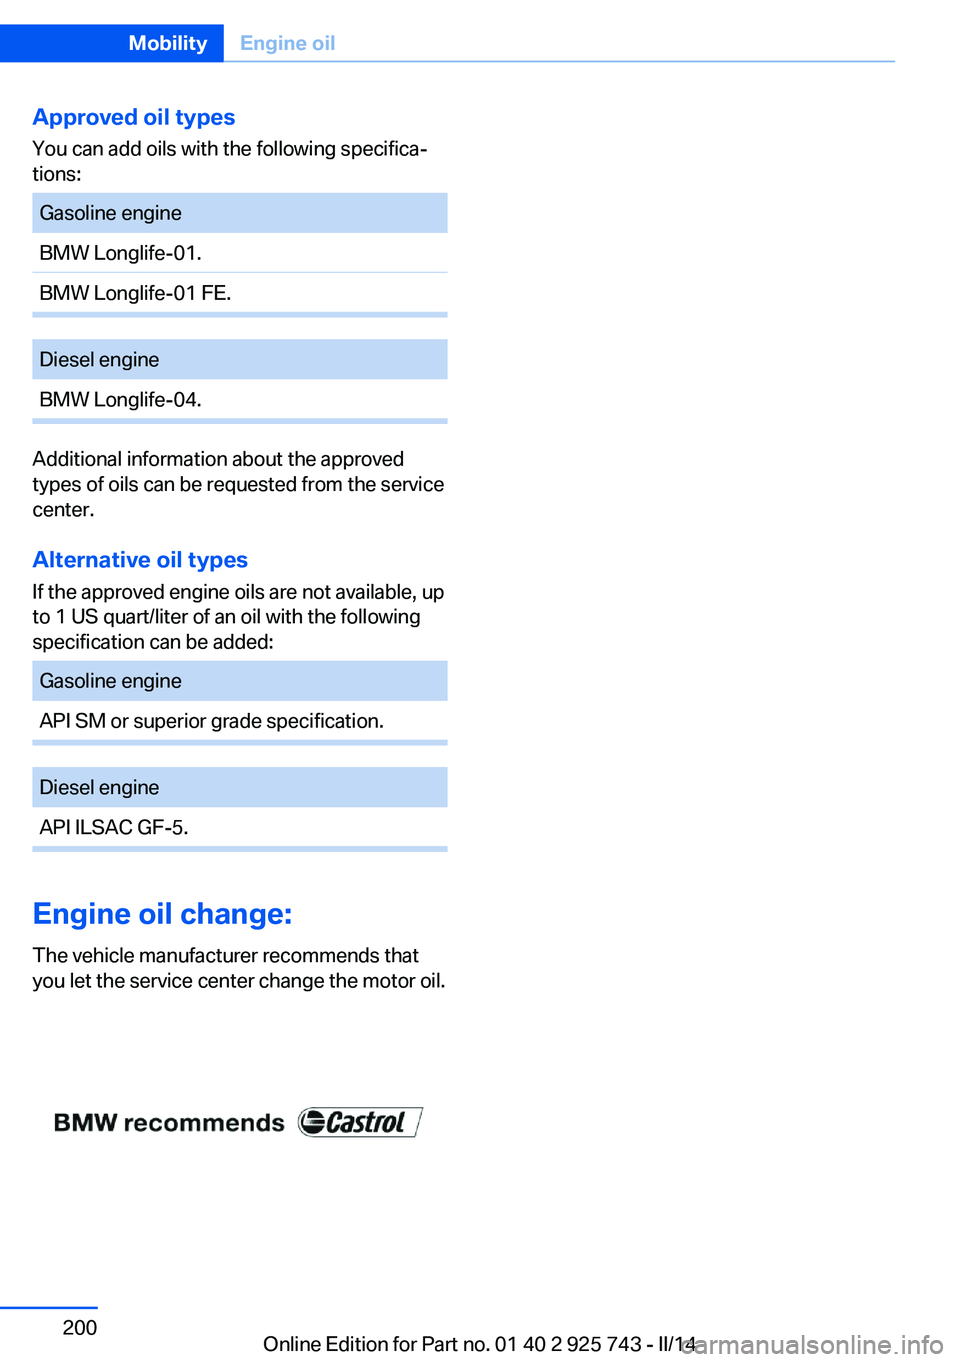 BMW 335I XDRIVE 2014  Owners Manual Approved oil typesYou can add oils with the following specifica‐
tions:Gasoline engineBMW Longlife-01.BMW Longlife-01 FE.Diesel engineBMW Longlife-04.
Additional information about the approved
types